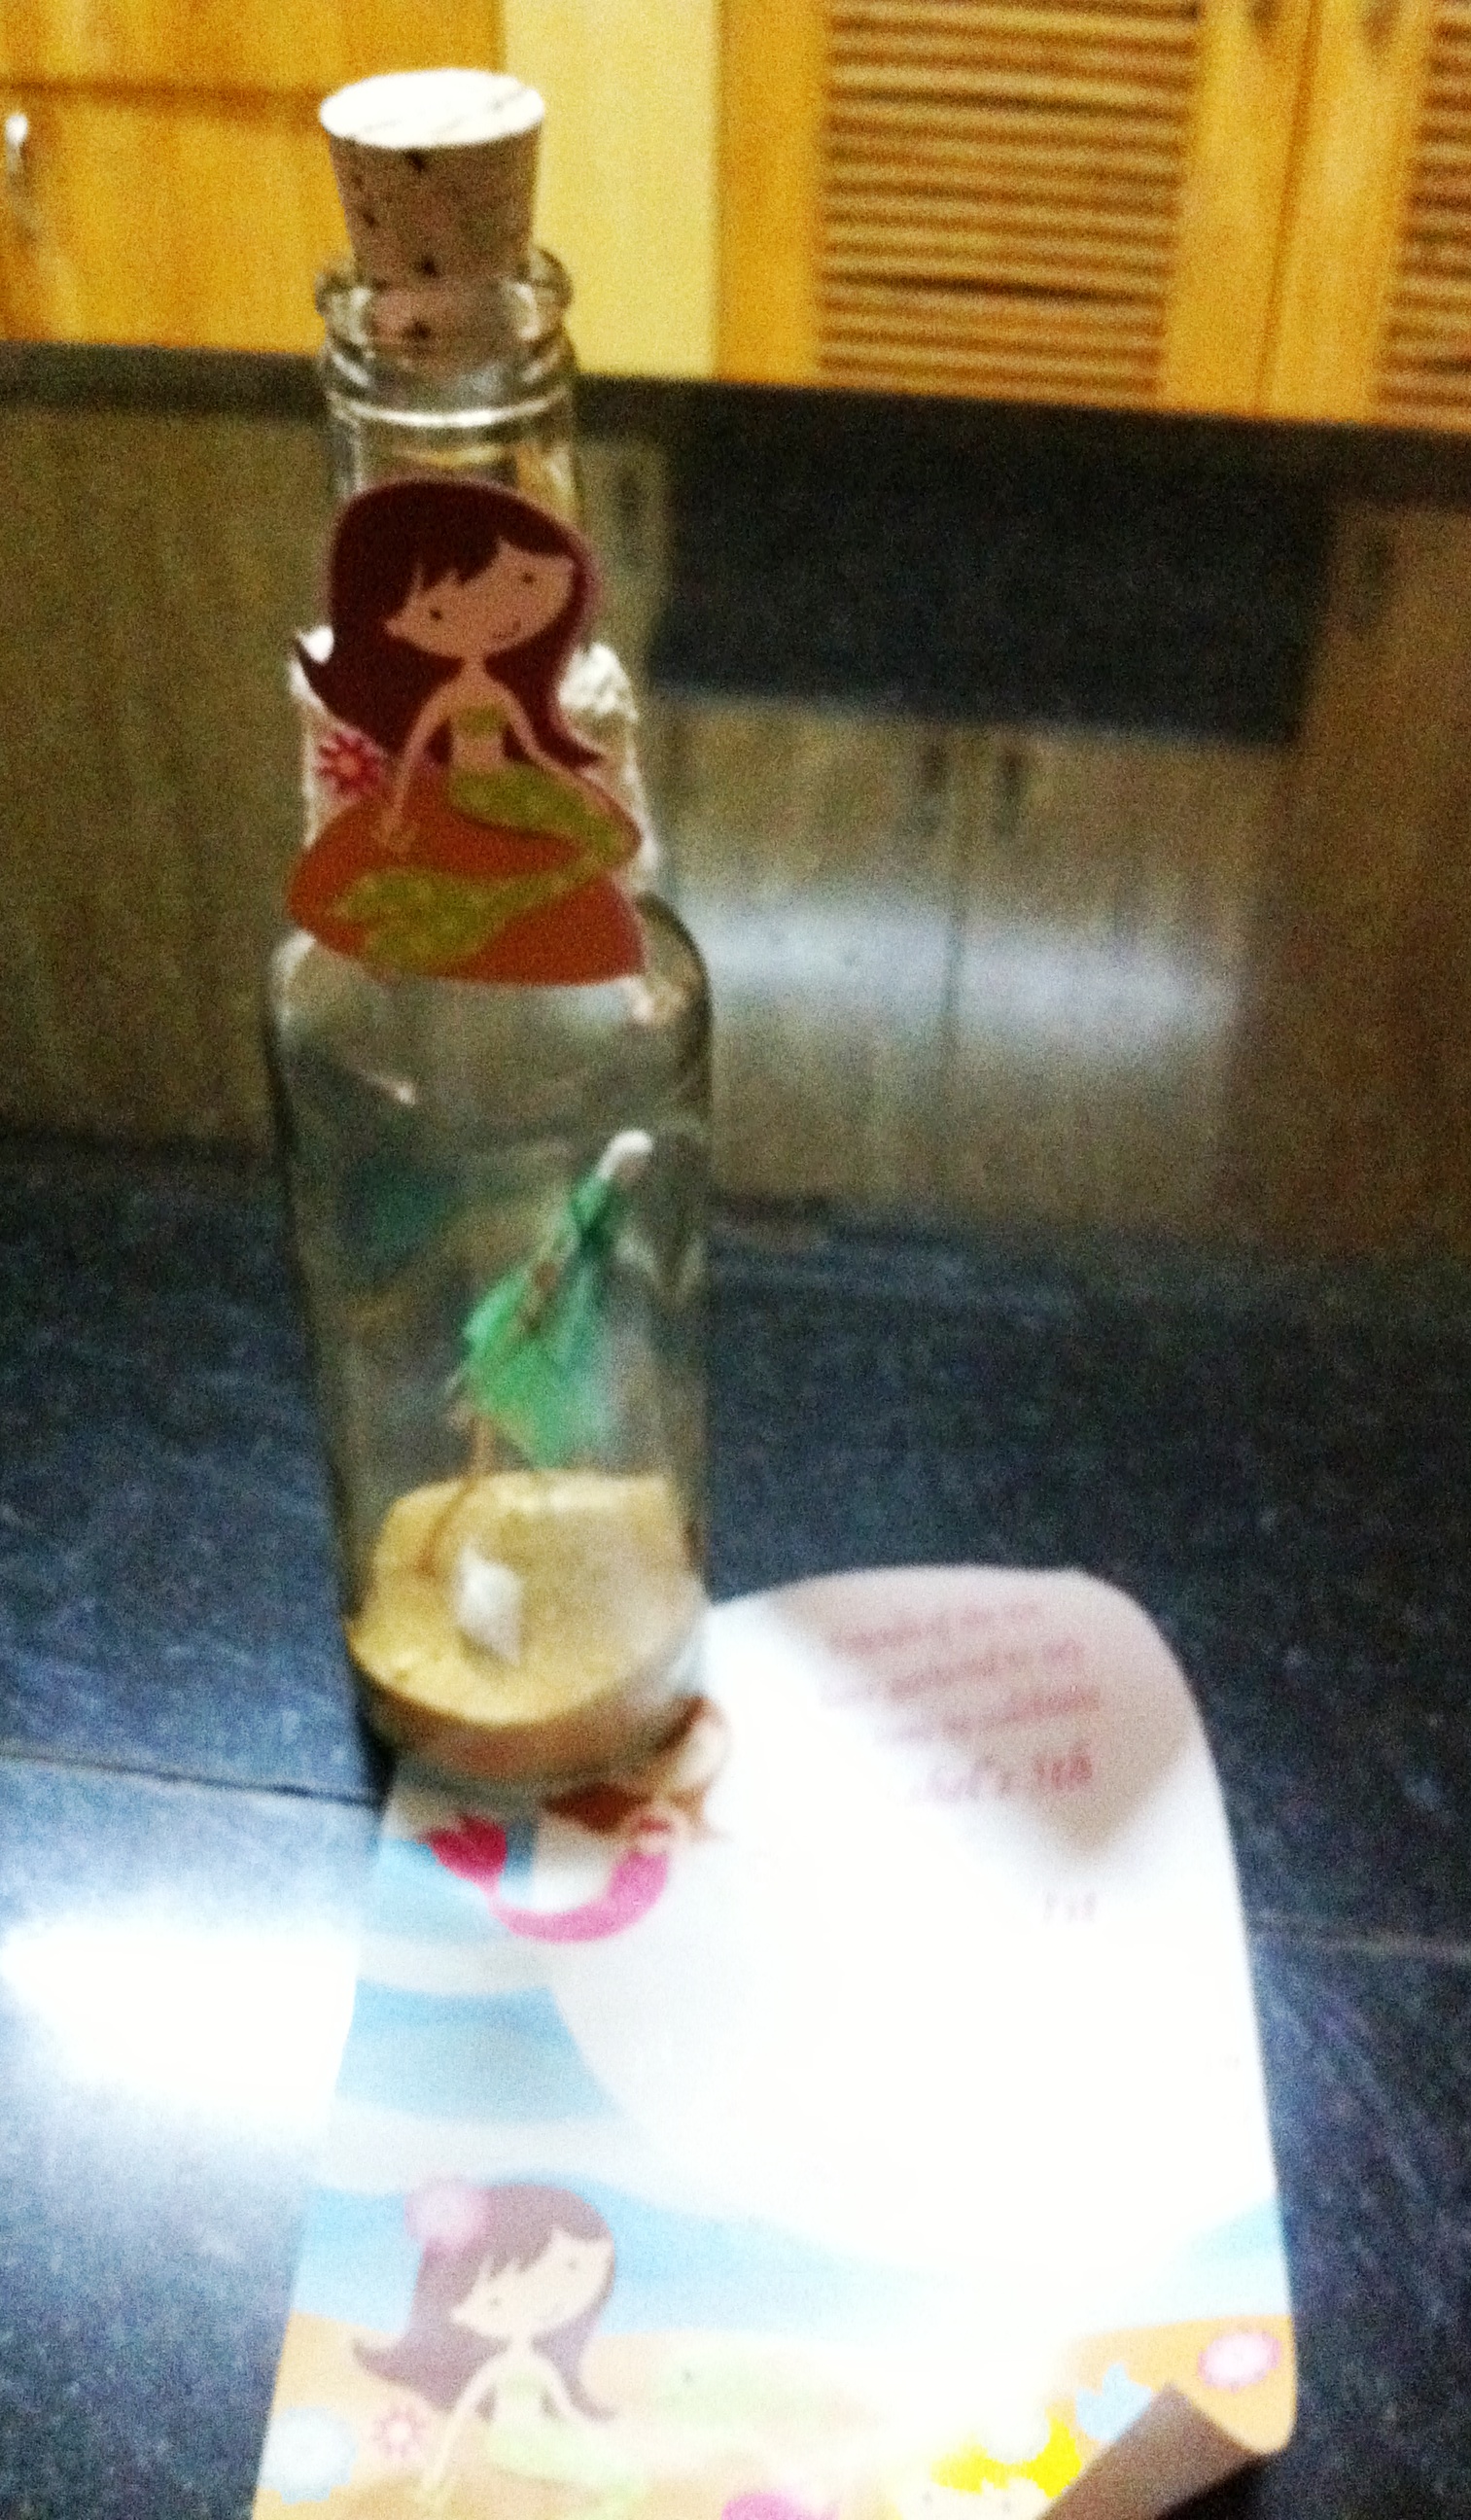 The party invite - Message in a Bottle style